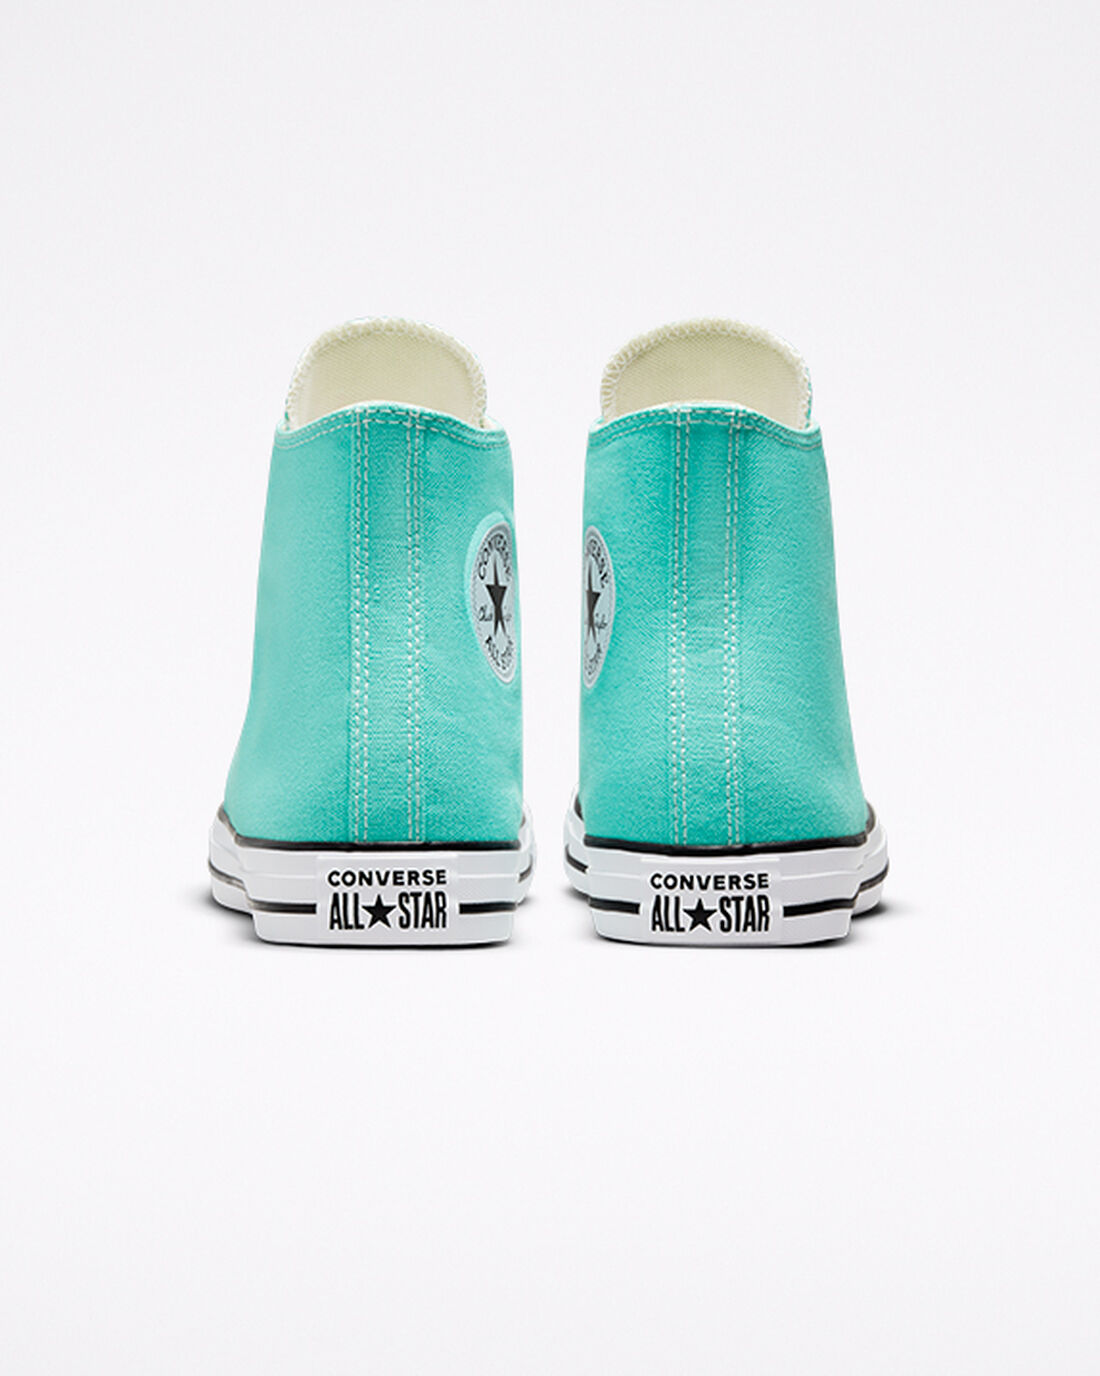 Women's Converse Chuck Taylor All Star High Top Sneakers Light Turquoise | Australia-14297